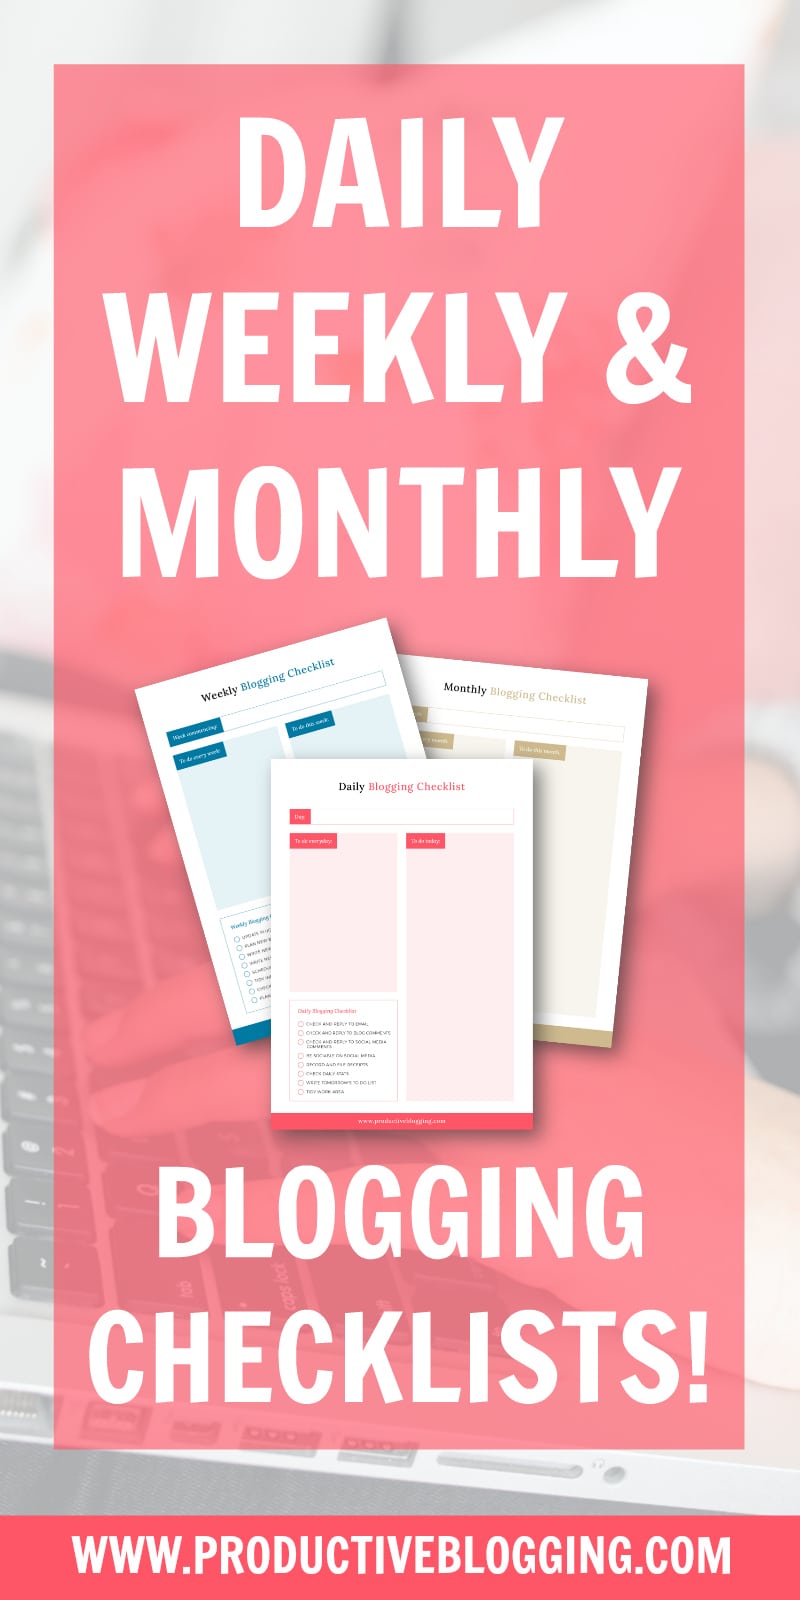 Blogging is a whole lot more than writing posts! How do you keep on top of all the tasks? Steal my daily, weekly and monthly blogging checklists to help you stay on track! #bloggingtodolist #bloggingtodolists #bloggingchecklist #bloggingchecklists #todolist #checklist #blogging #bloggers #bloggerofIG #instabloggers #bloggingtips #blogginghacks #productivity #productivitytips #productivityhacks #solopreneur #productiveblogging #productivebloggingcommunity